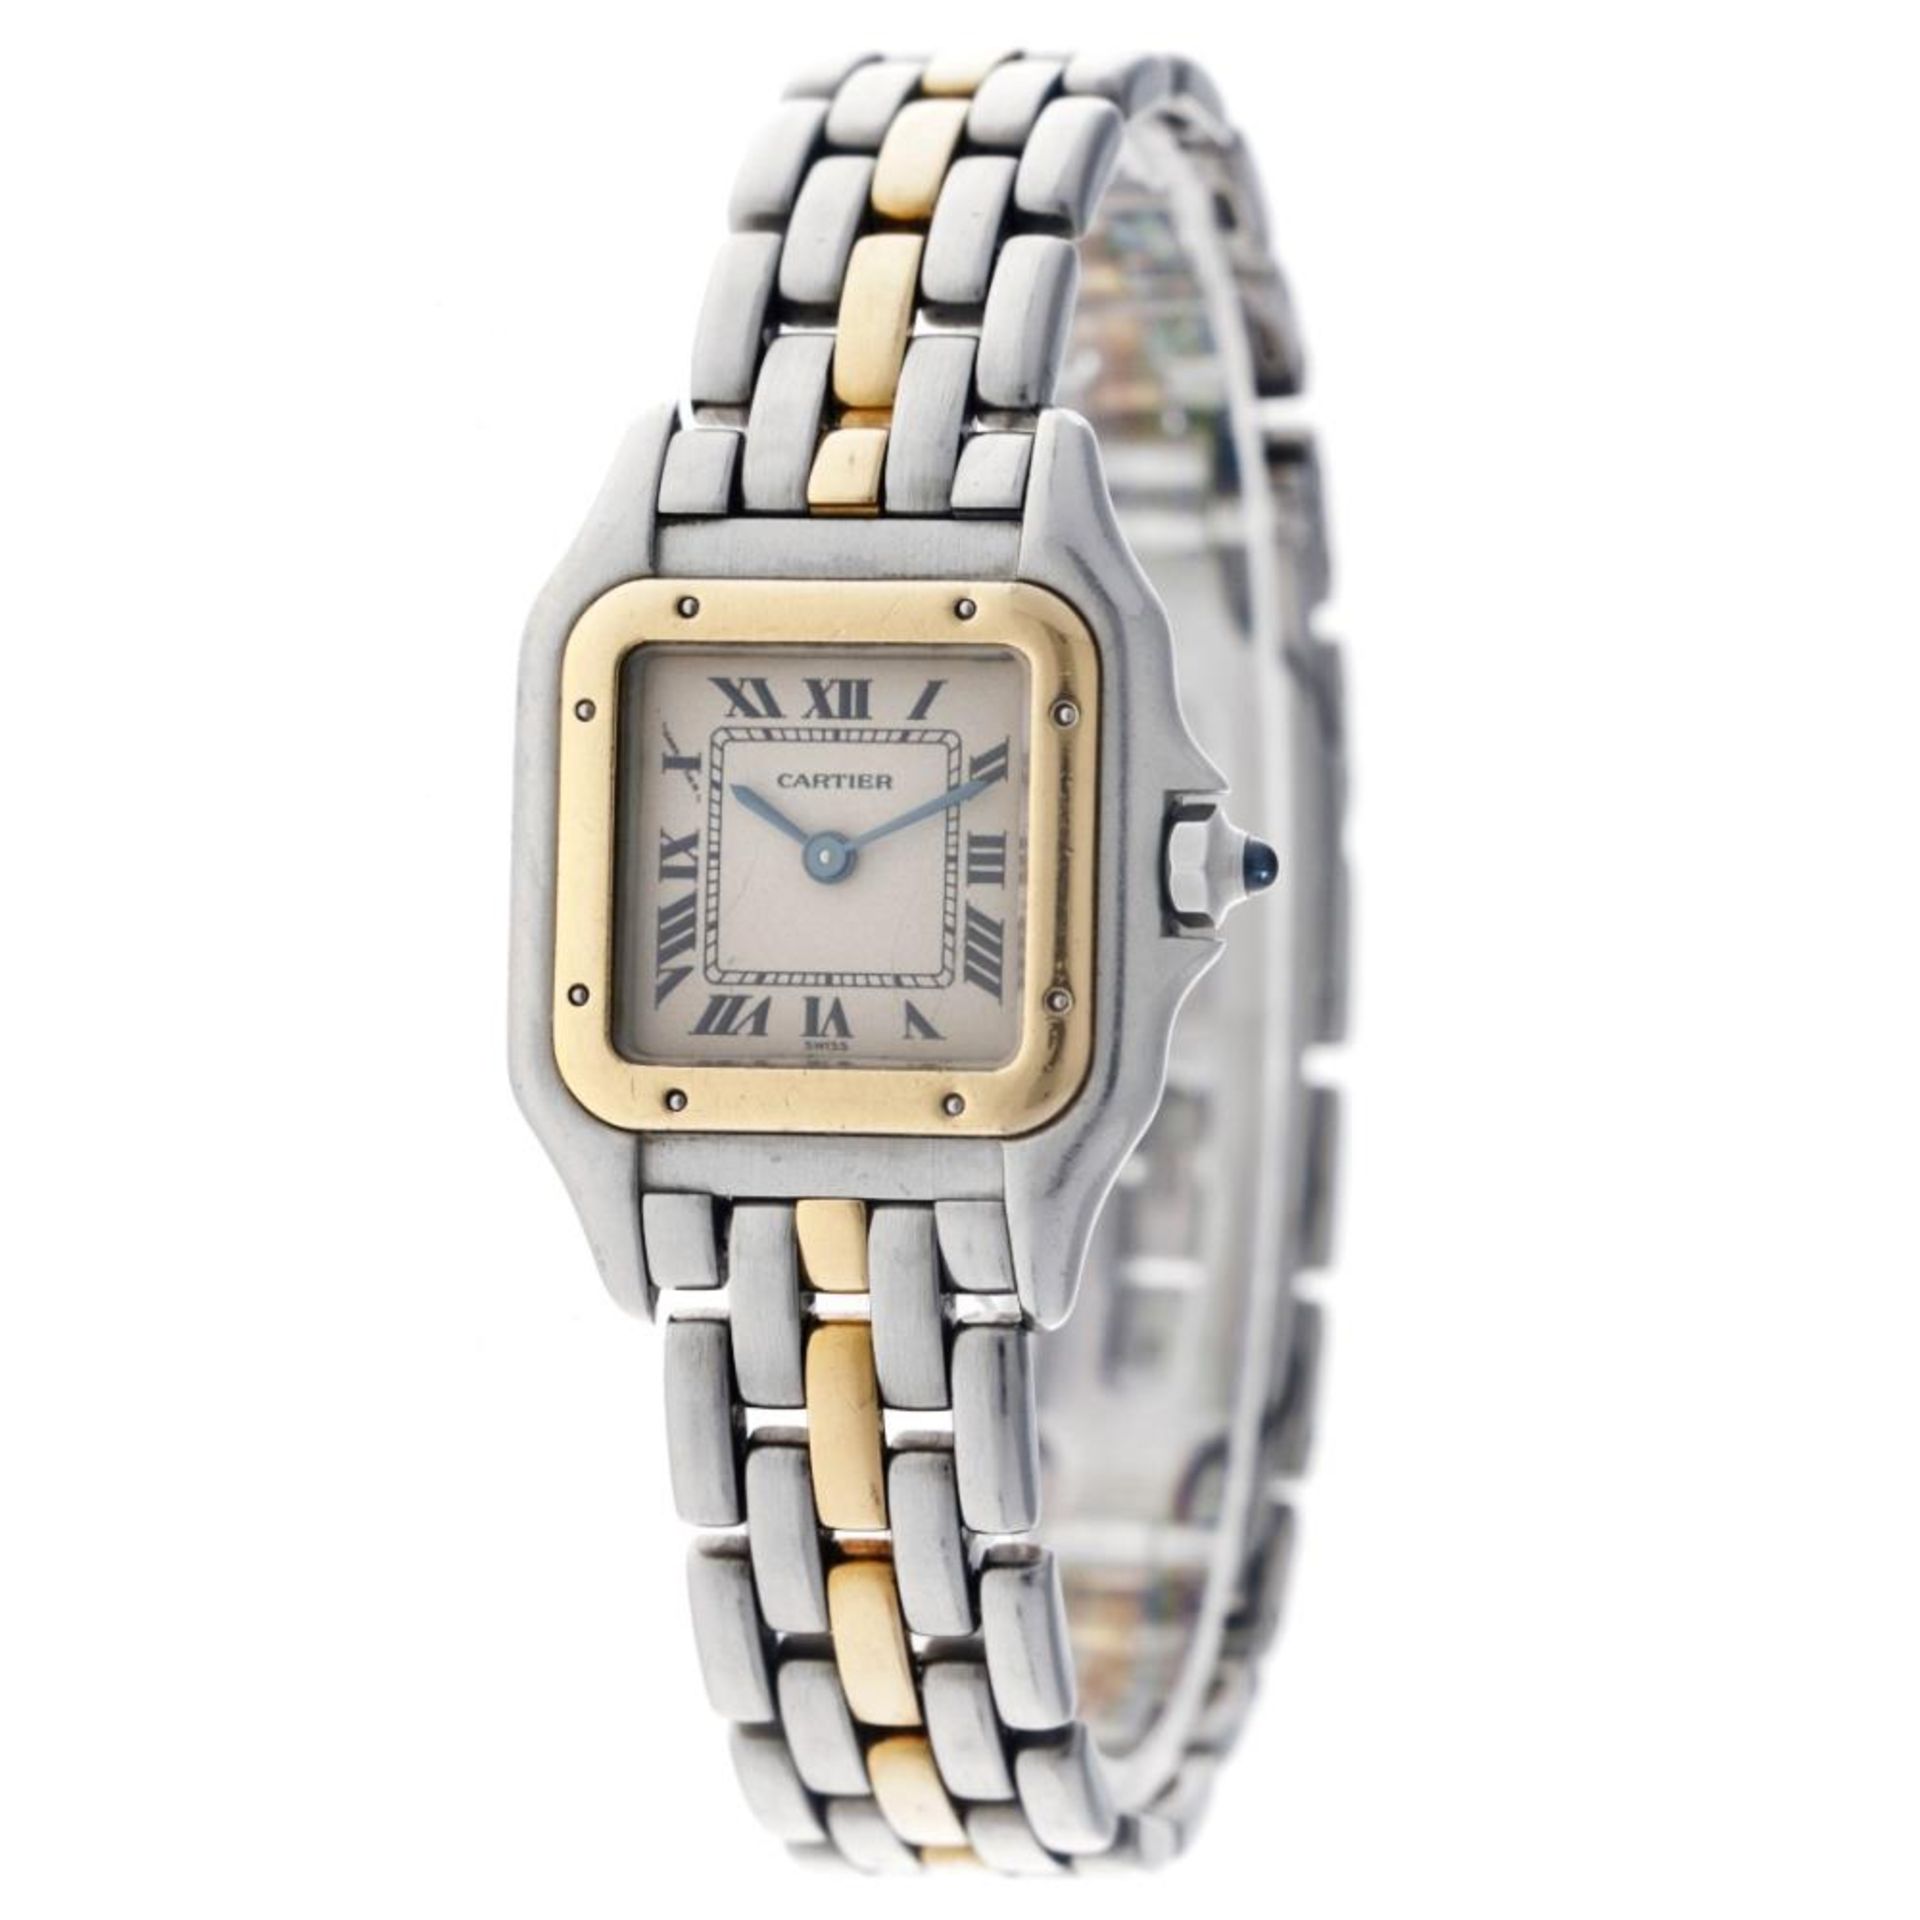 Cartier Panthere 166921 - Ladies watch - approx. 1989. - Image 4 of 12